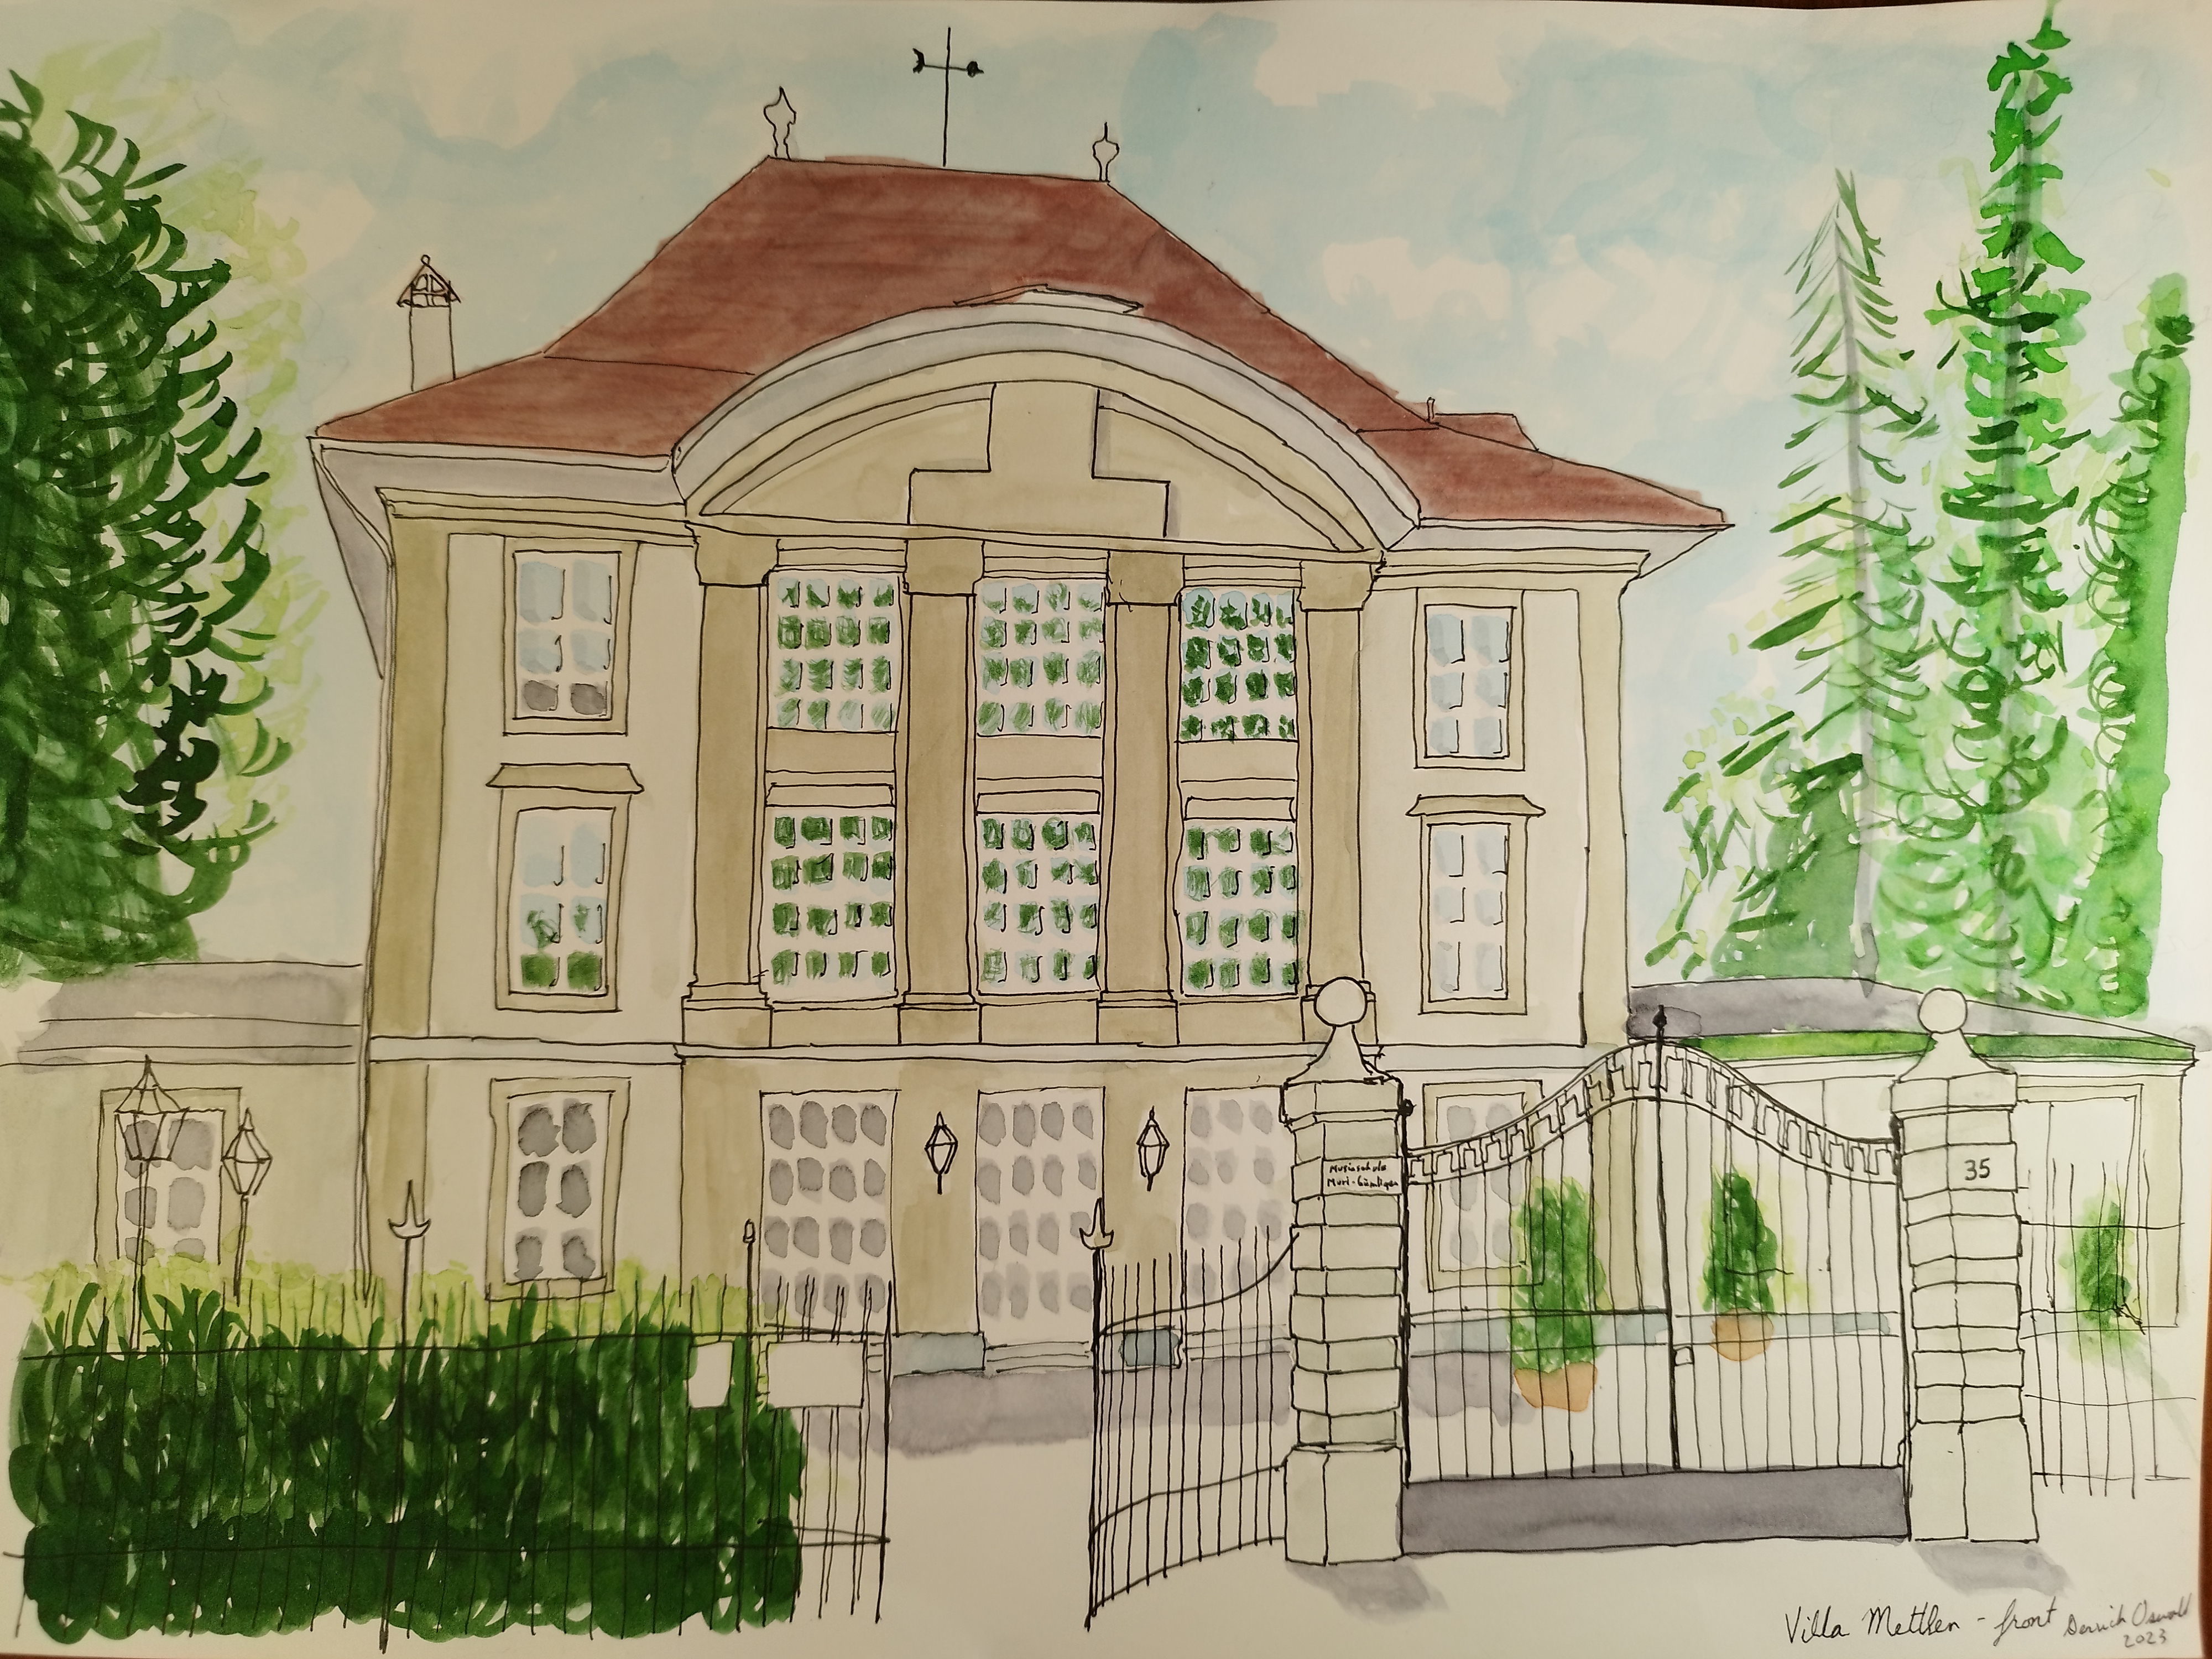 watercolour of the Villa Mettlen from the north